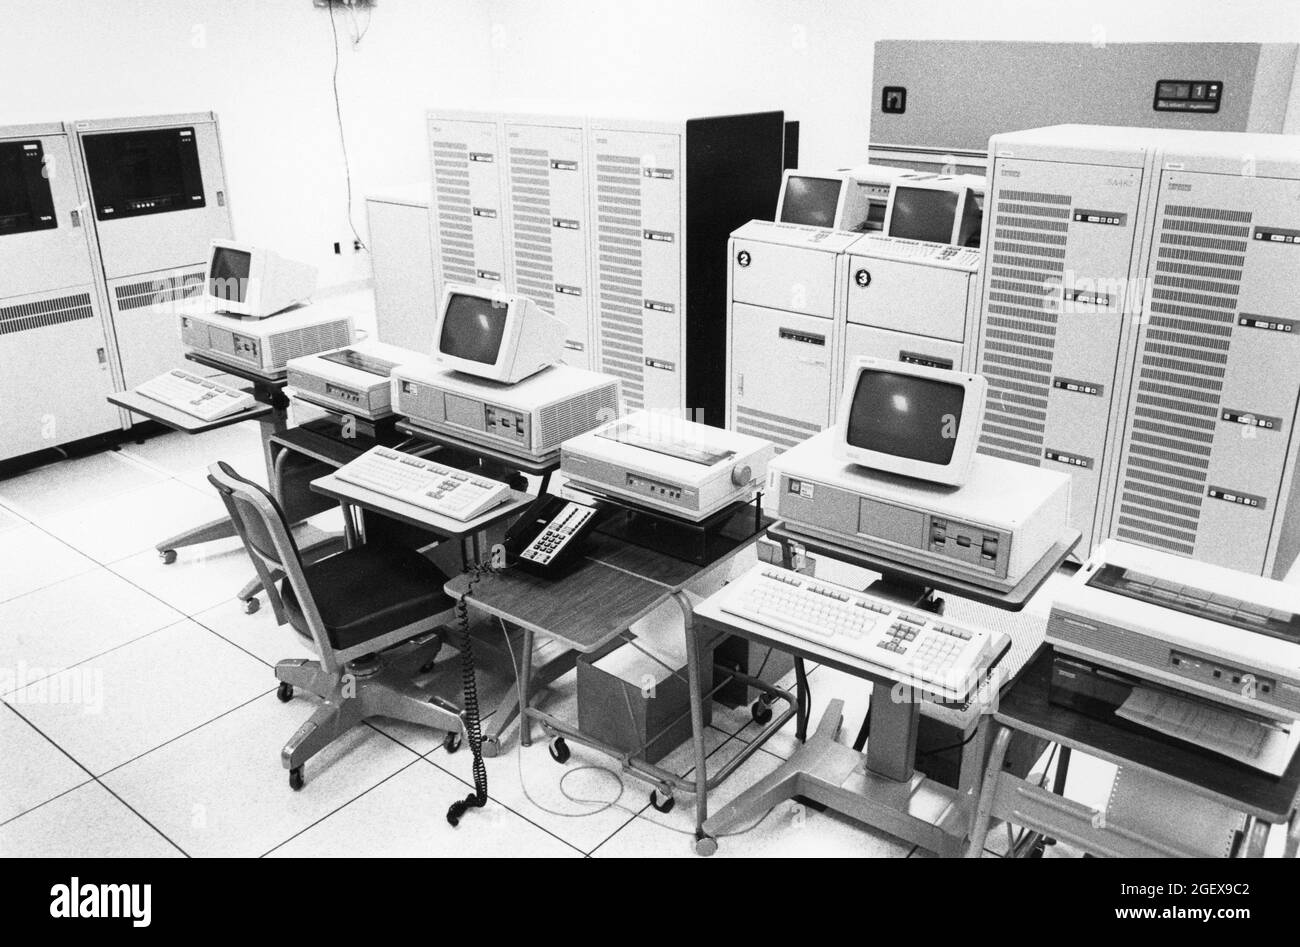 Austin Texas USA, 1990: Desktop computer terminals, printers, and a bank of mainframe computers are ready for data entry at a United States Census data processing facility during the decennial count of people living in the country. ©Bob Daemmrich Stock Photo